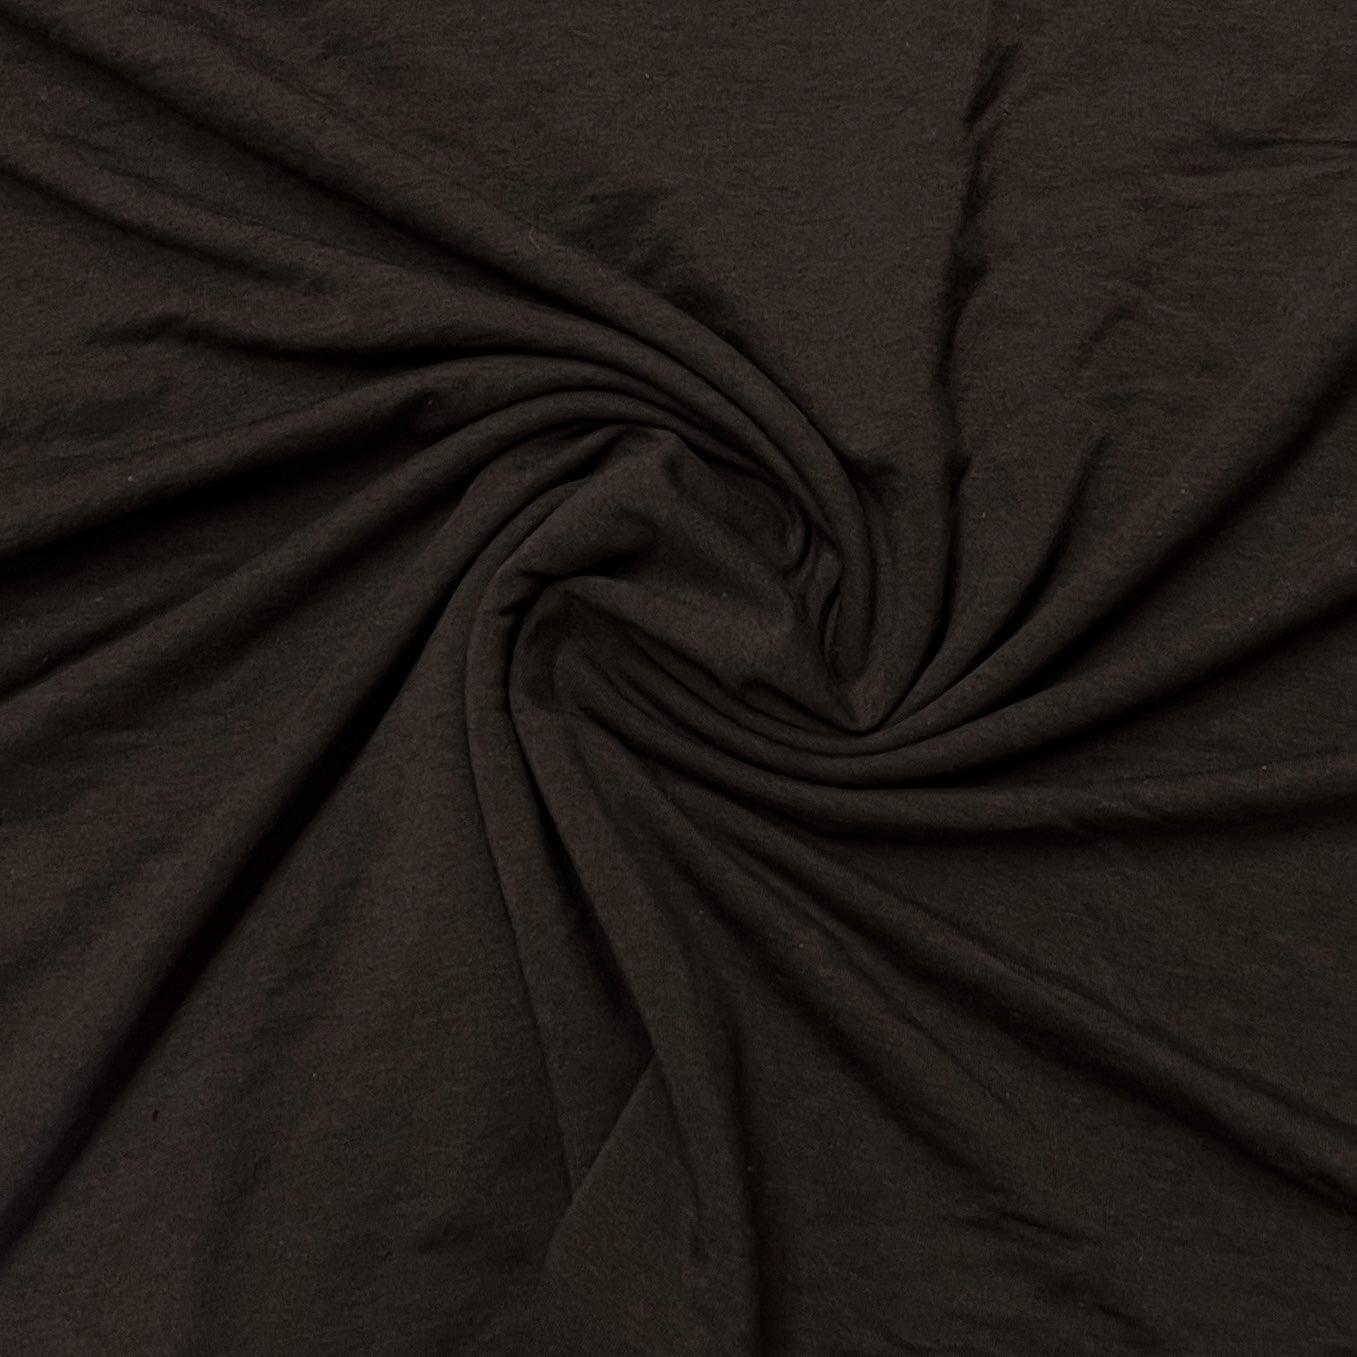 Dark Brown Bamboo Stretch French Terry Fabric - 265 GSM, $12.86/yd, 15 Yards - Nature's Fabrics